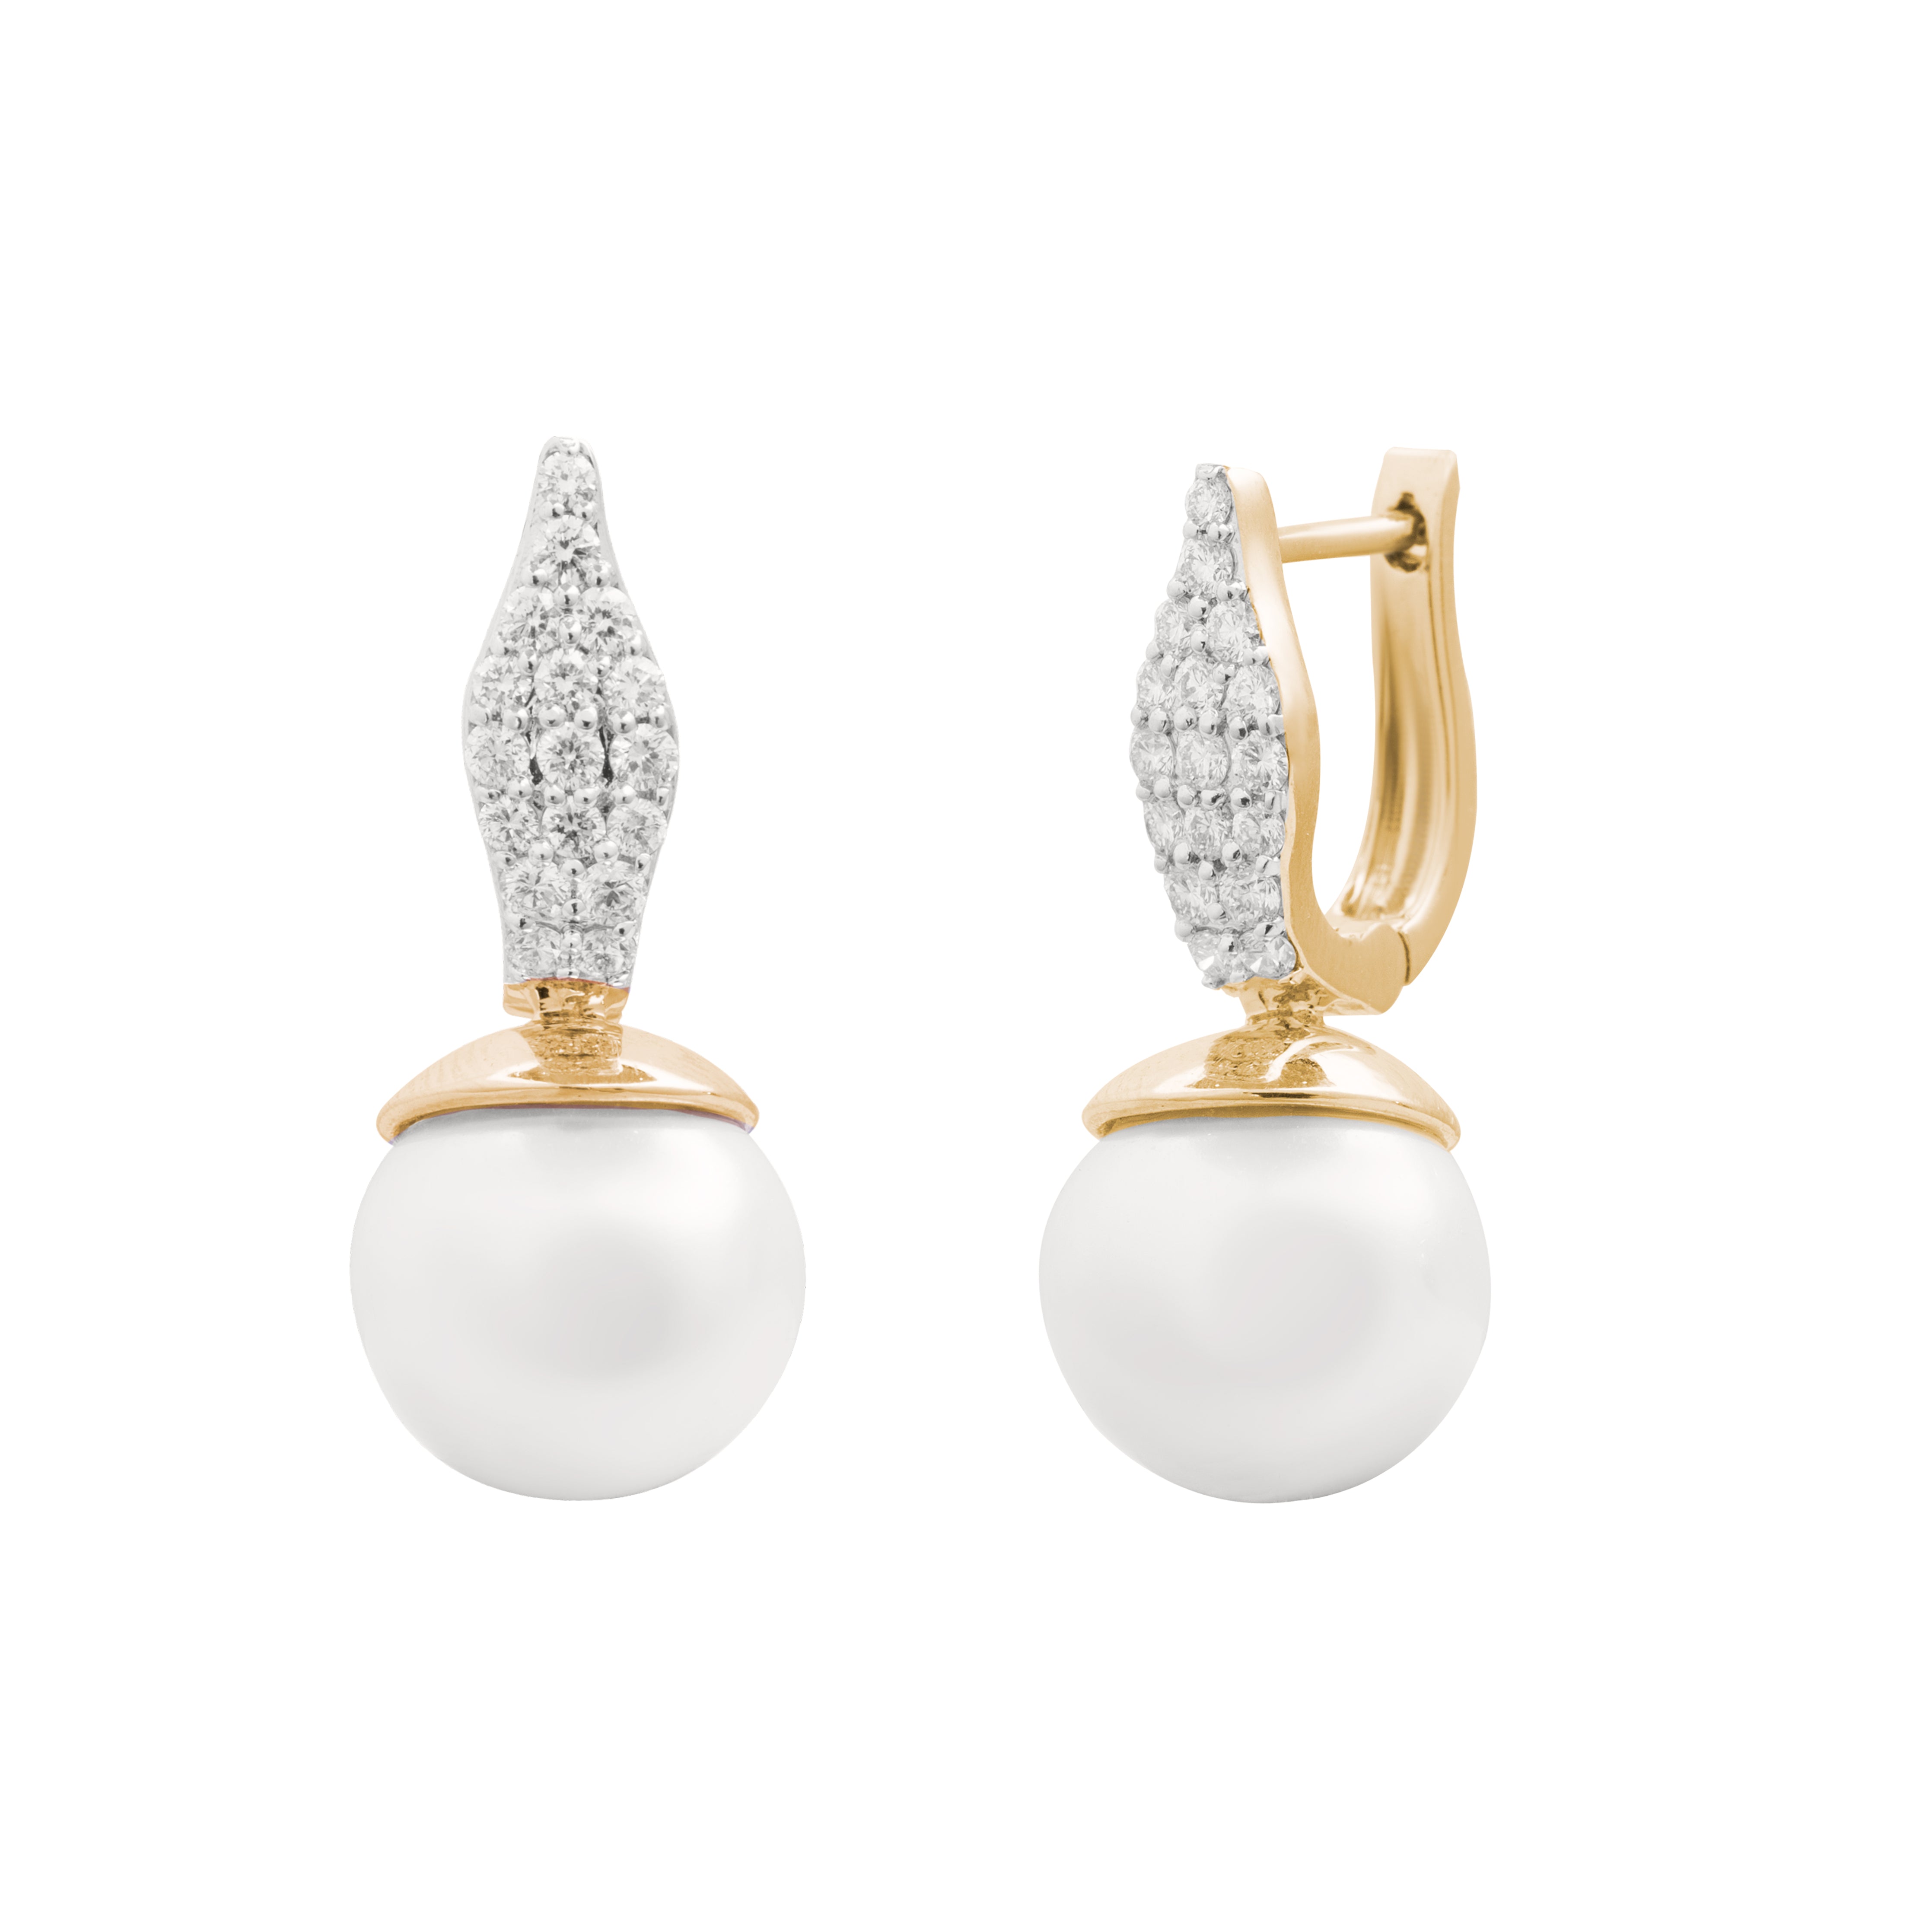 Renaissance Pearl Trillion Drop Earrings in 18K Yellow Gold with Pearls and  Diamond, 26mm | David Yurman